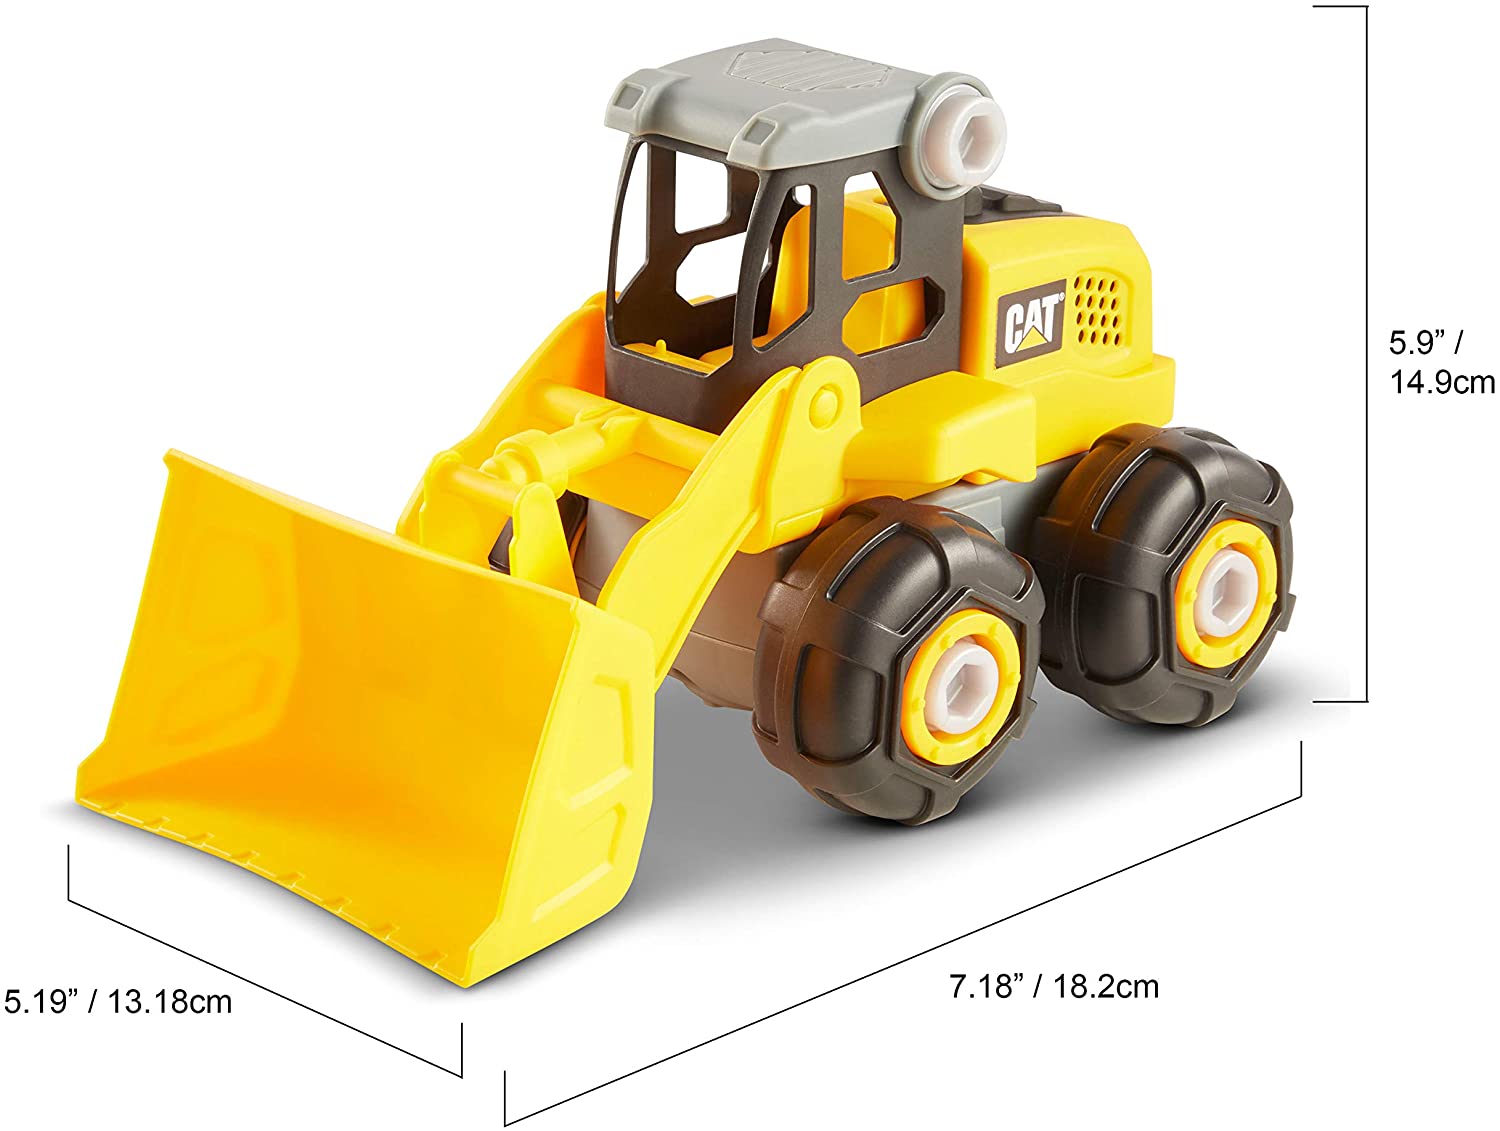 CAT Construction Build Your Own Wheel Loader